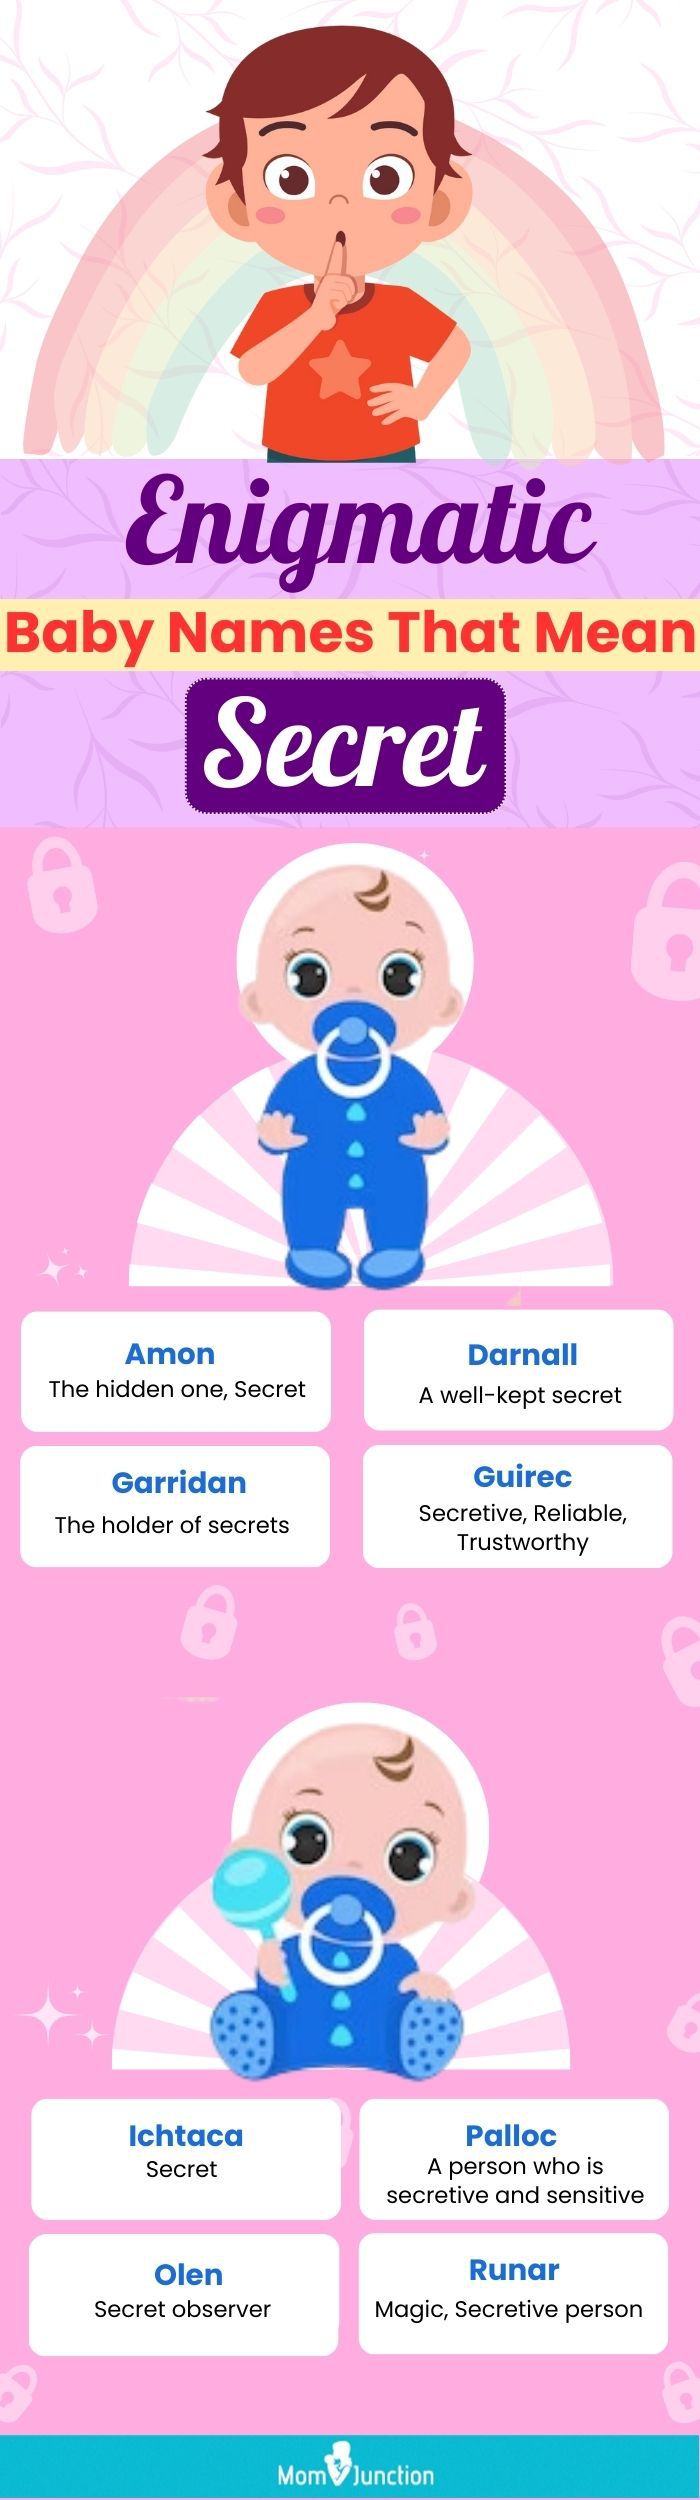 enigmatic baby names that means secret (infographic)